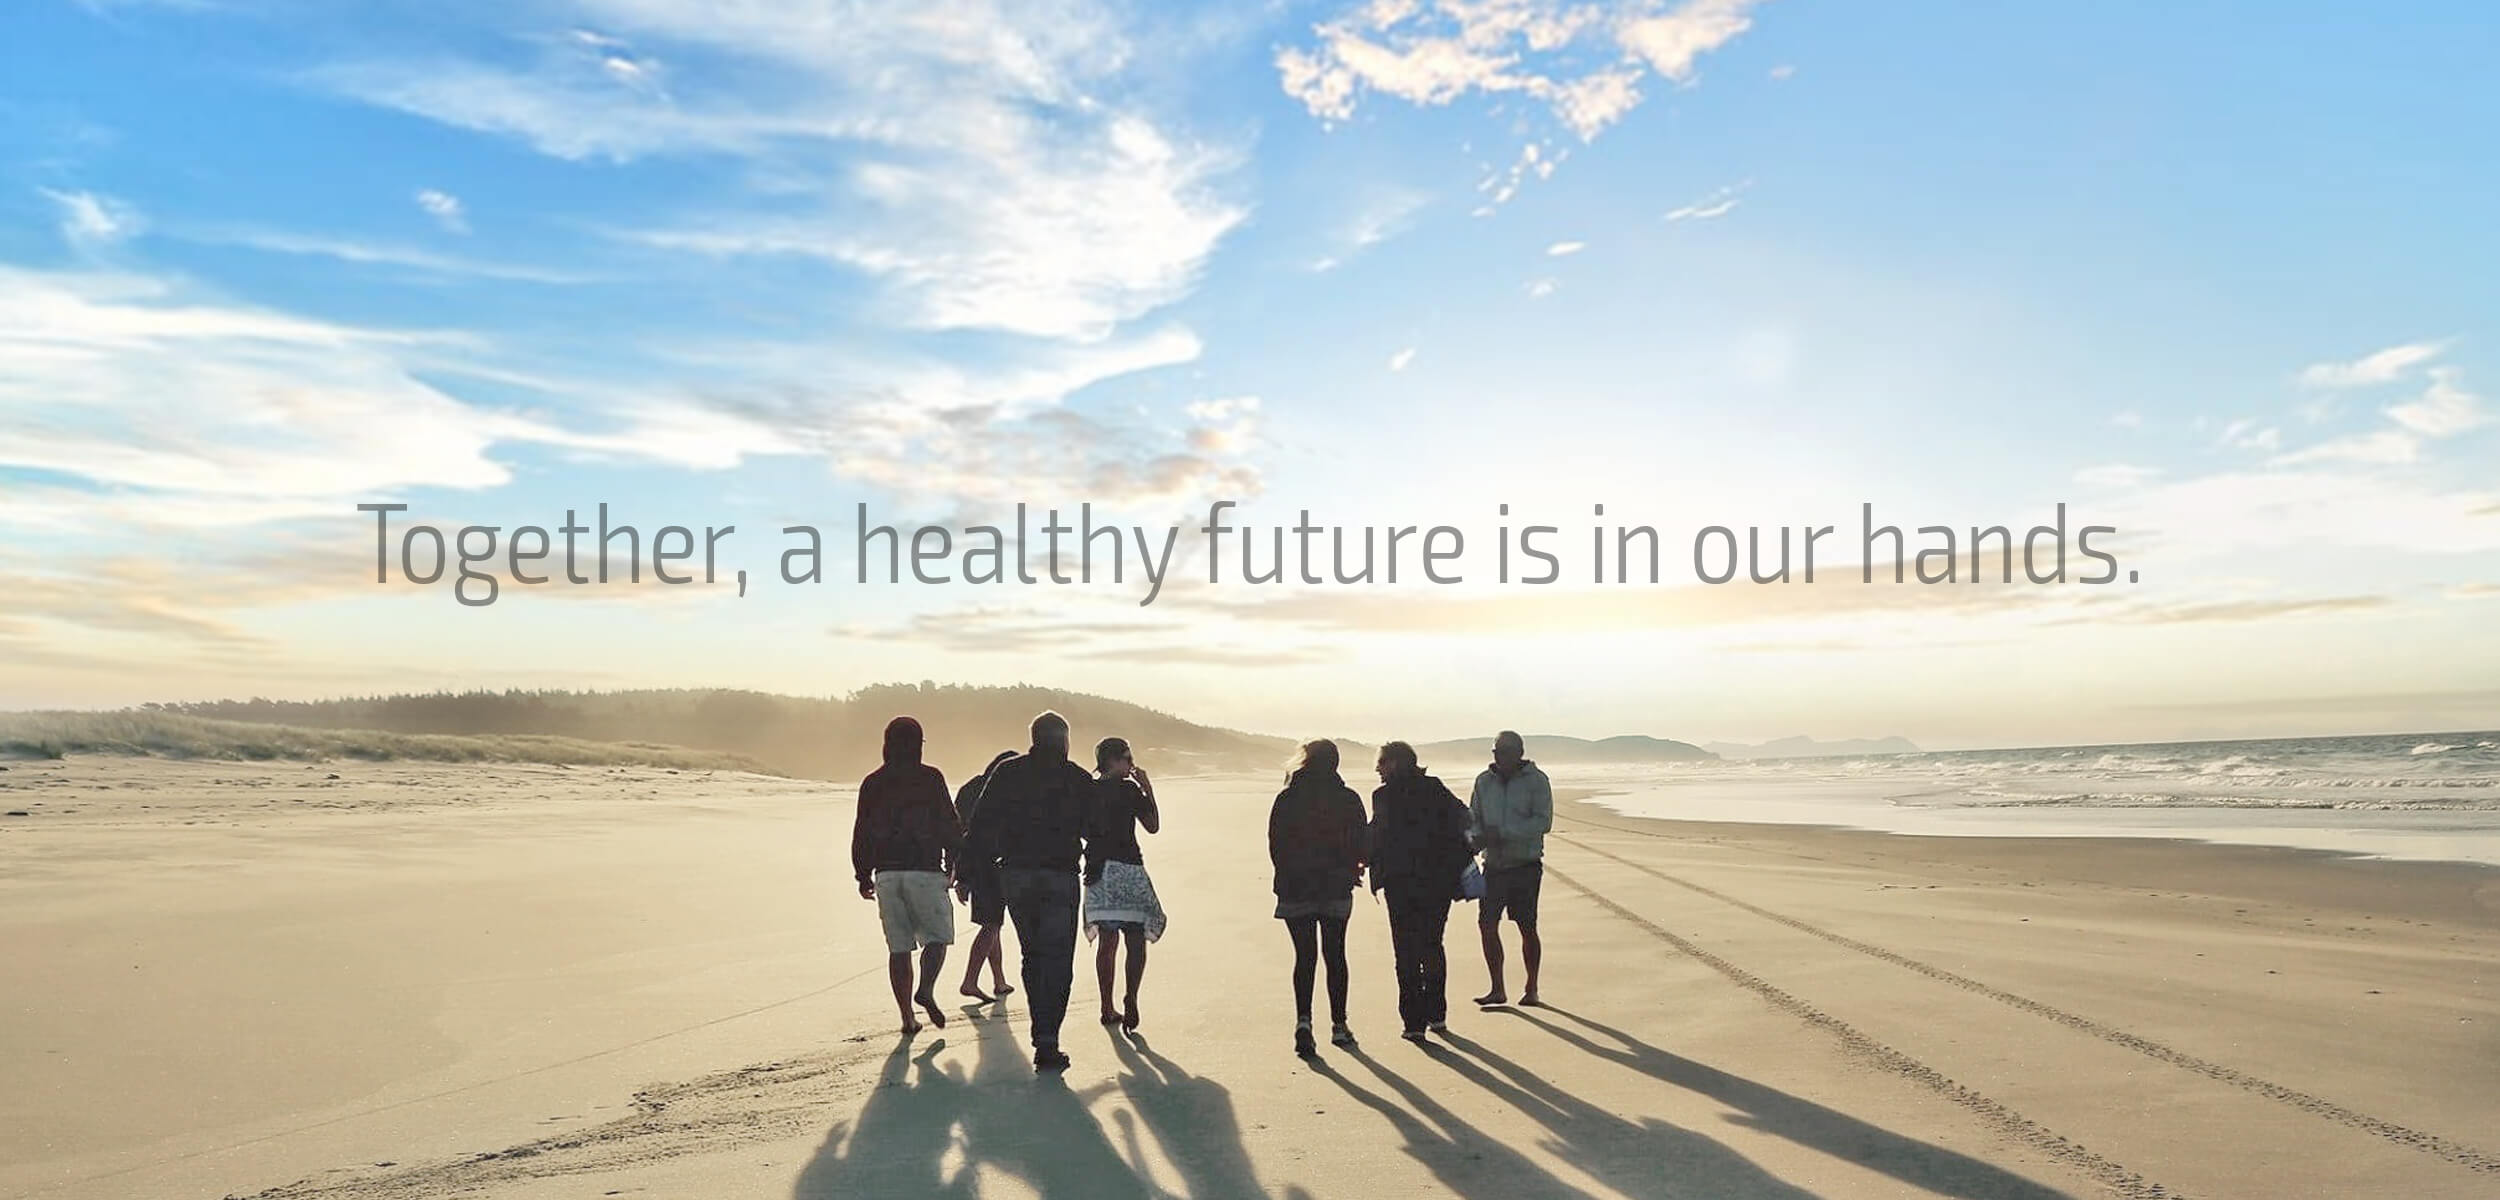 Together, a healthy future is in our hands